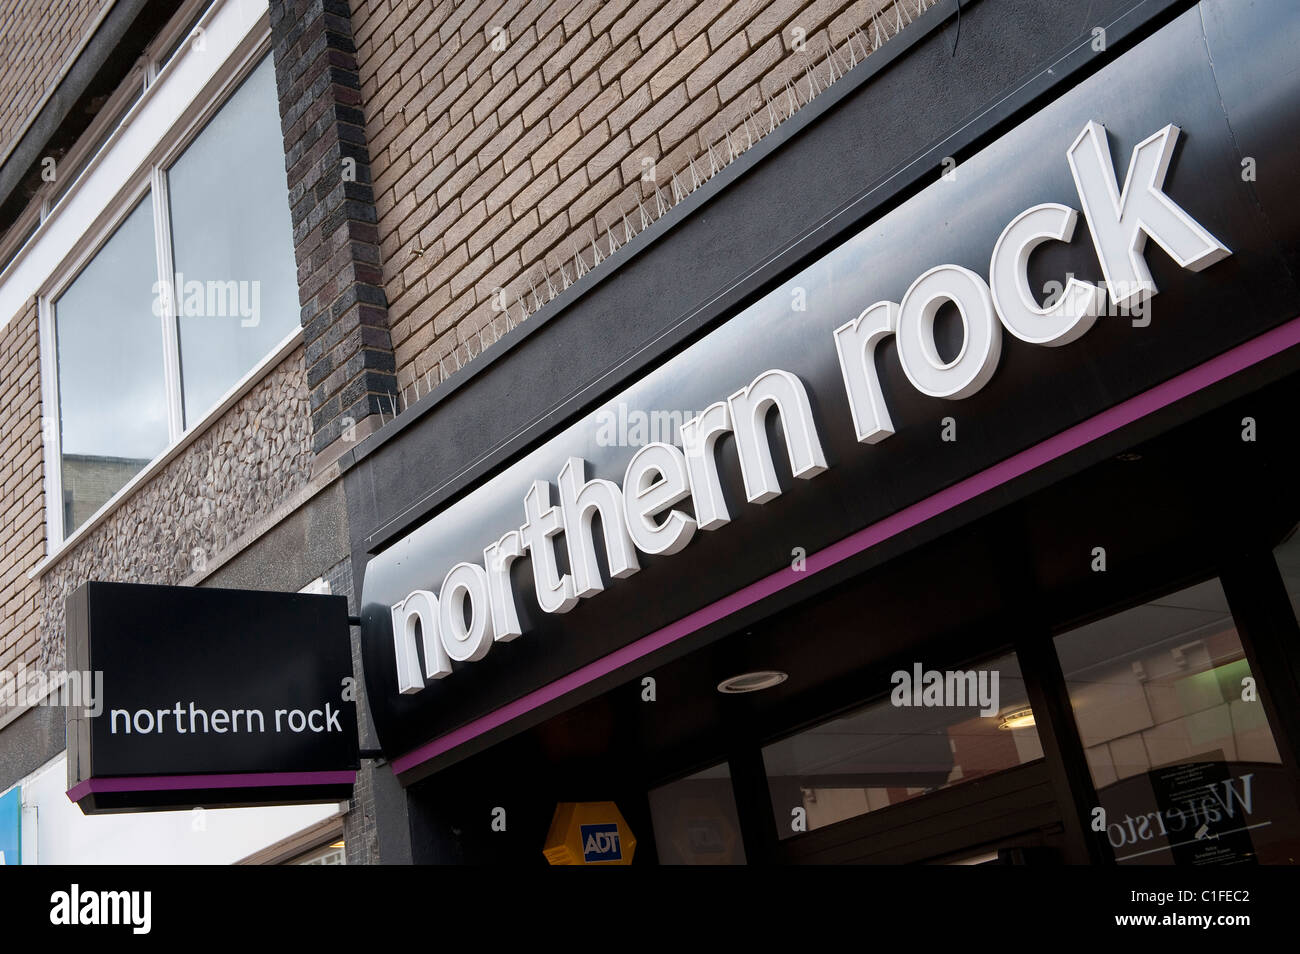 Exterior view of Northern Rock bank. Stock Photo